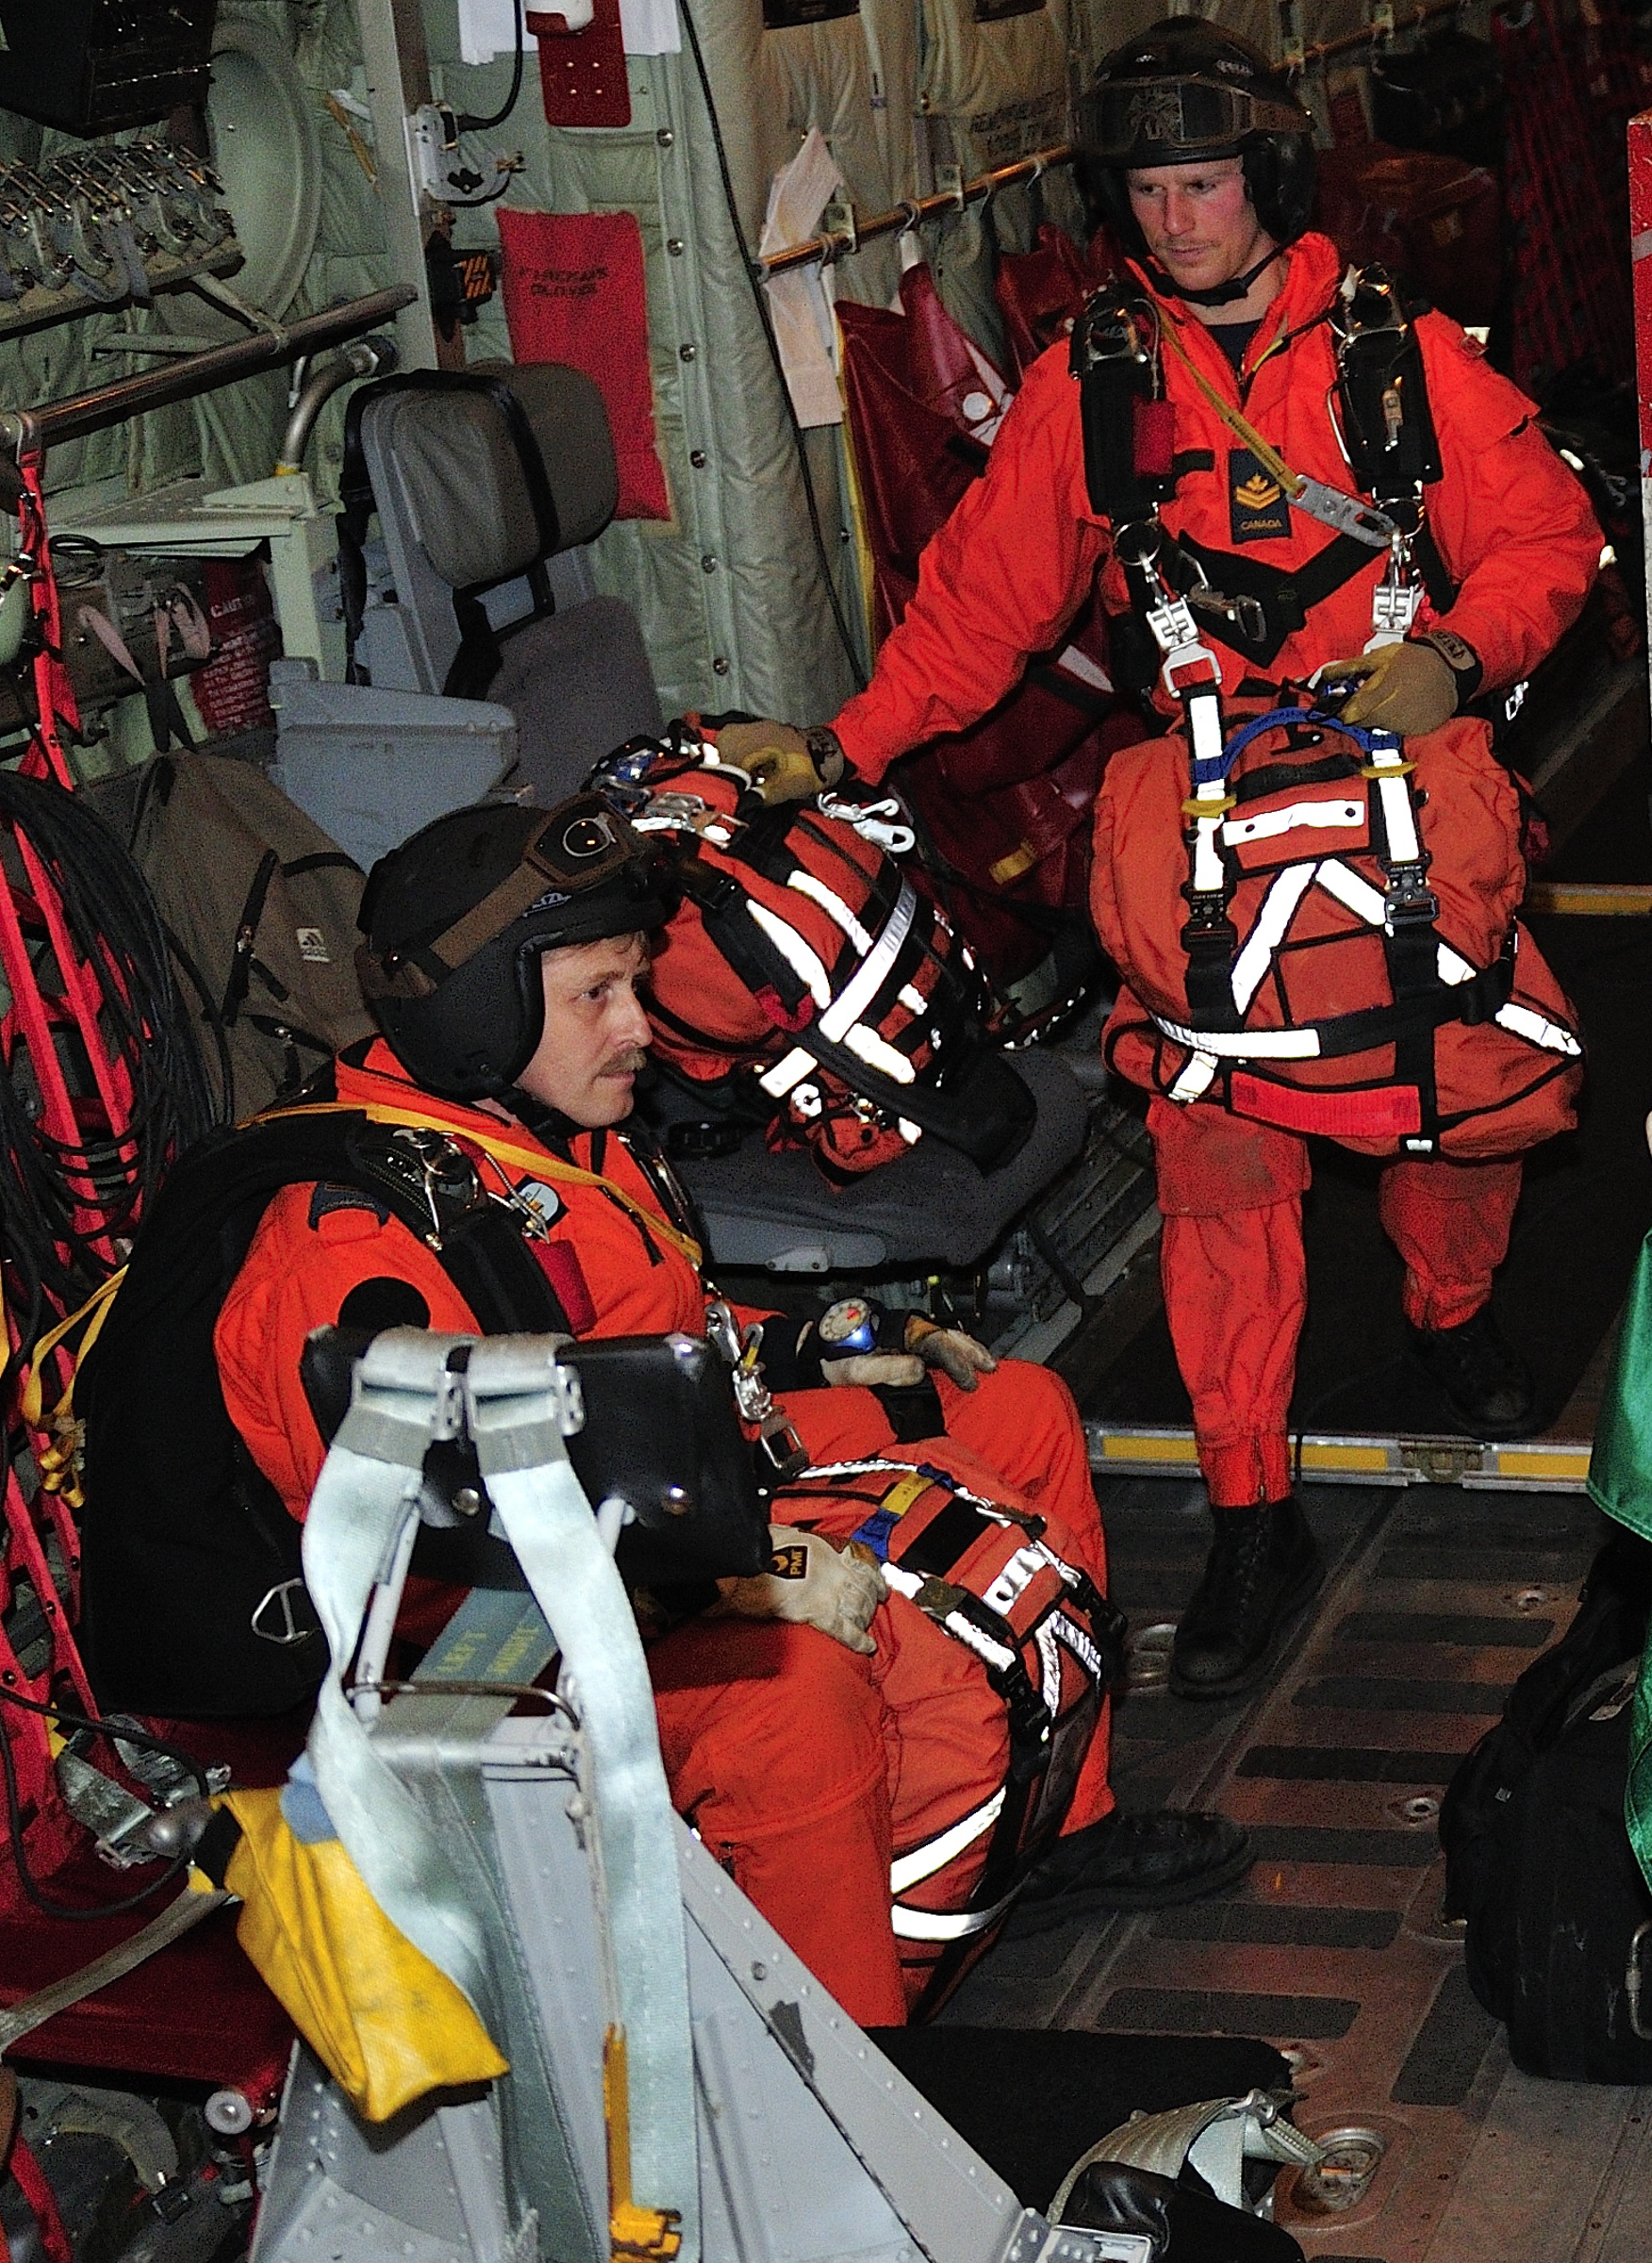 Sergeant André Hotton, seated in the rear of a CC-130 Hercules, prepares for the search and rescue training work ahead with squadron mates at 413 (Transport and Rescue) Squadron, 14 Wing Greenwood, in 2014. PHOTO: 14 Wing